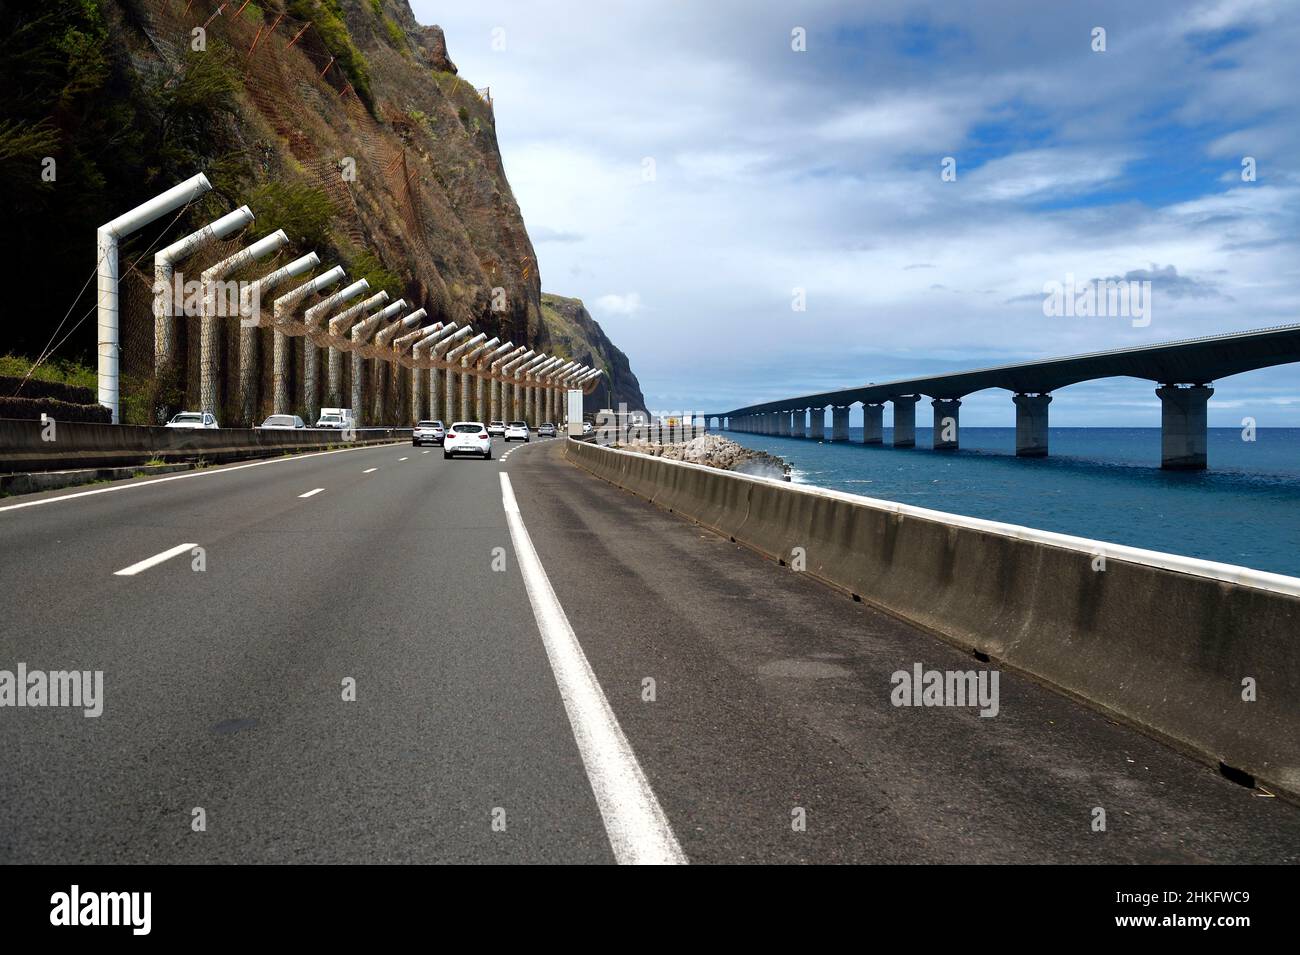 France, Reunion island (French overseas department), La Possession, the old national road still under the threat of rockfall and the New Coastal Route on the right ( Nouvelle Route du Littoral - NRL), 5.4 km long maritime viaduct between the capital Saint-Denis and the main commercial port to the West Stock Photo